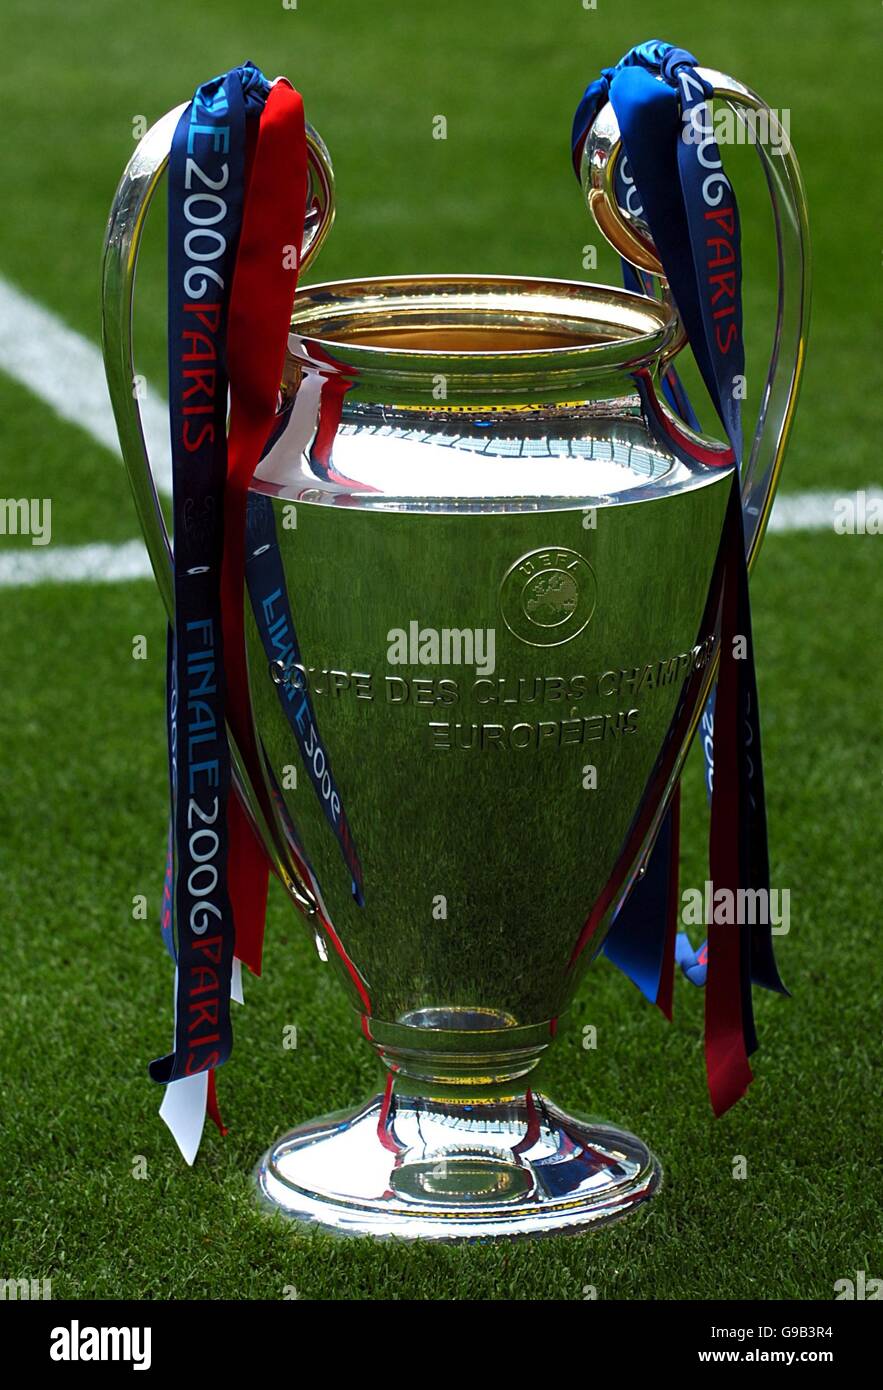 Champions league trophy Cut Out Stock Images & Pictures - Alamy